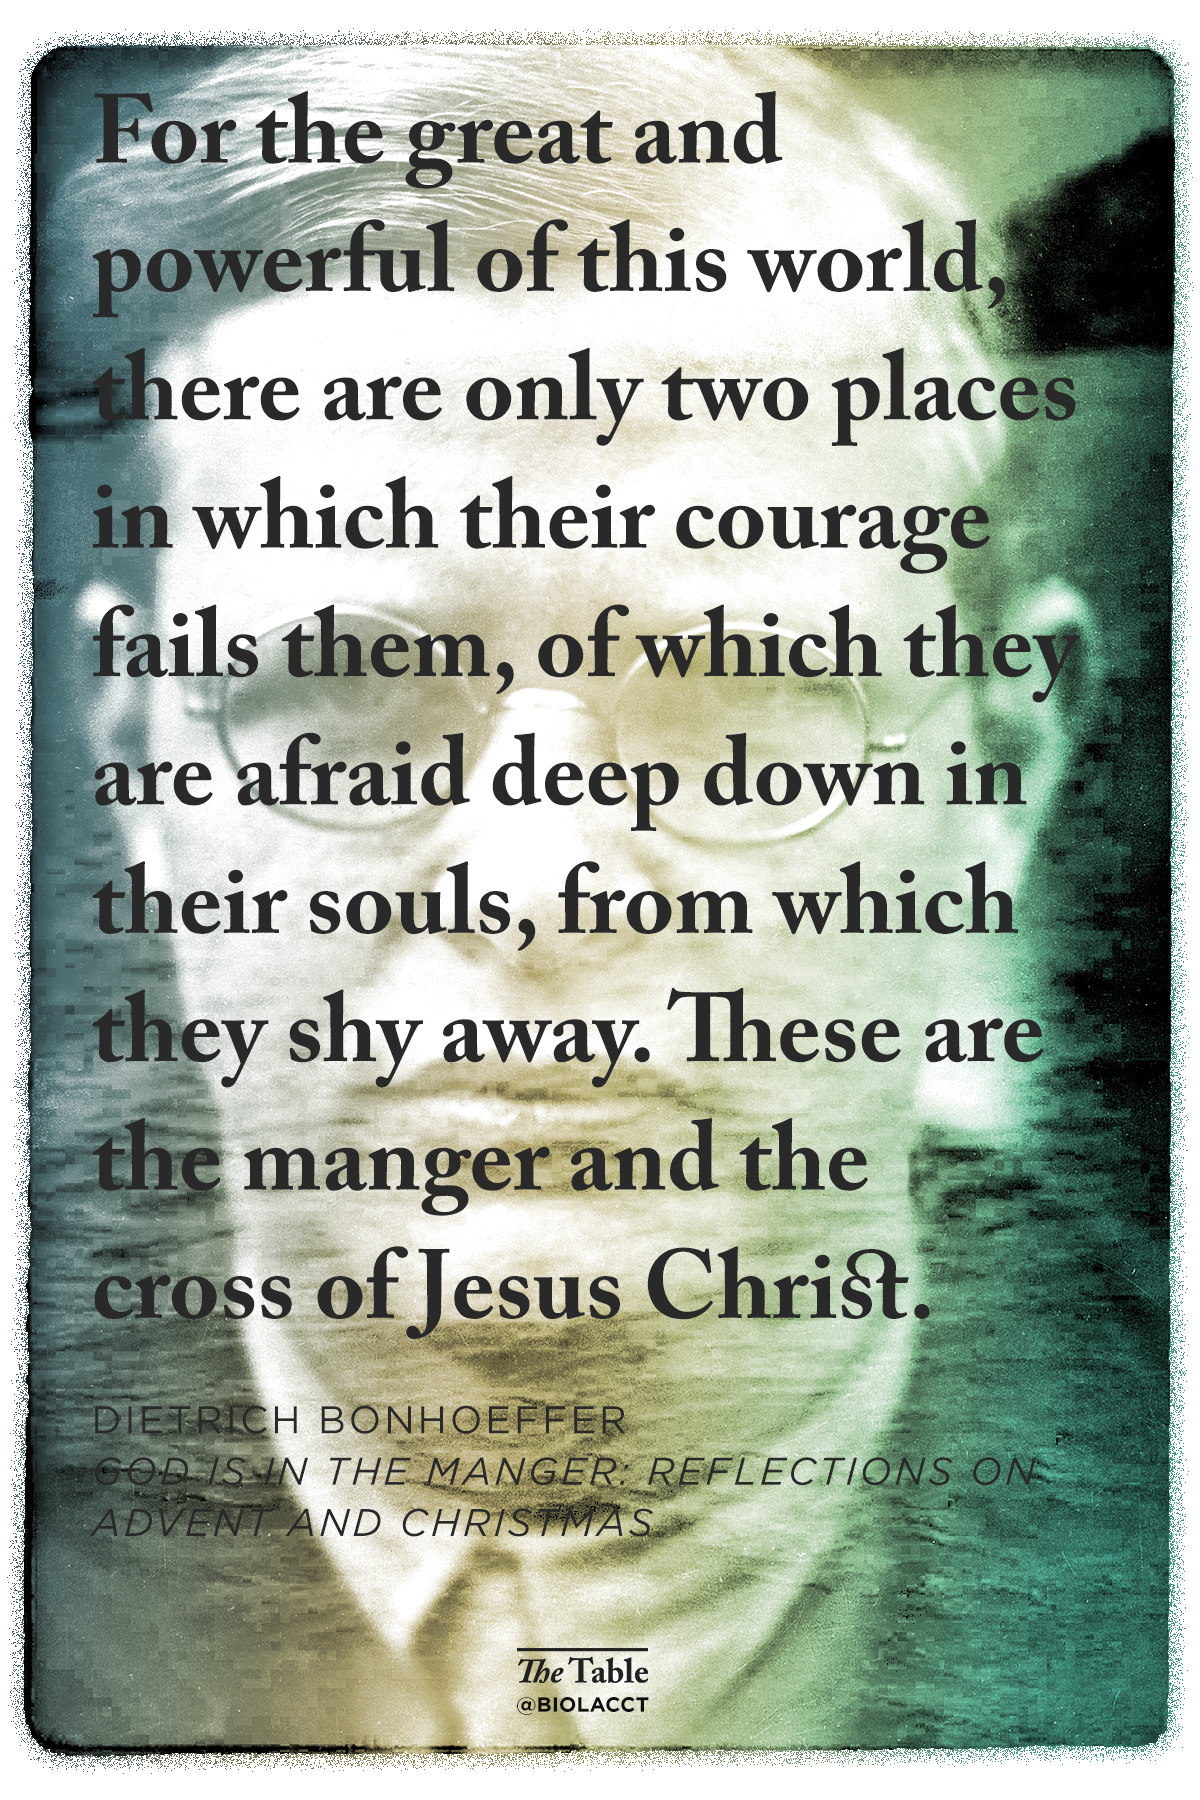 For the great and powerful of this world, there are only two places in which their courage fails them, of which they are afraid deep down in their souls, from which they shy away. These are the manger and the cross of Jesus Christ. Dietrich Bonhoeffer